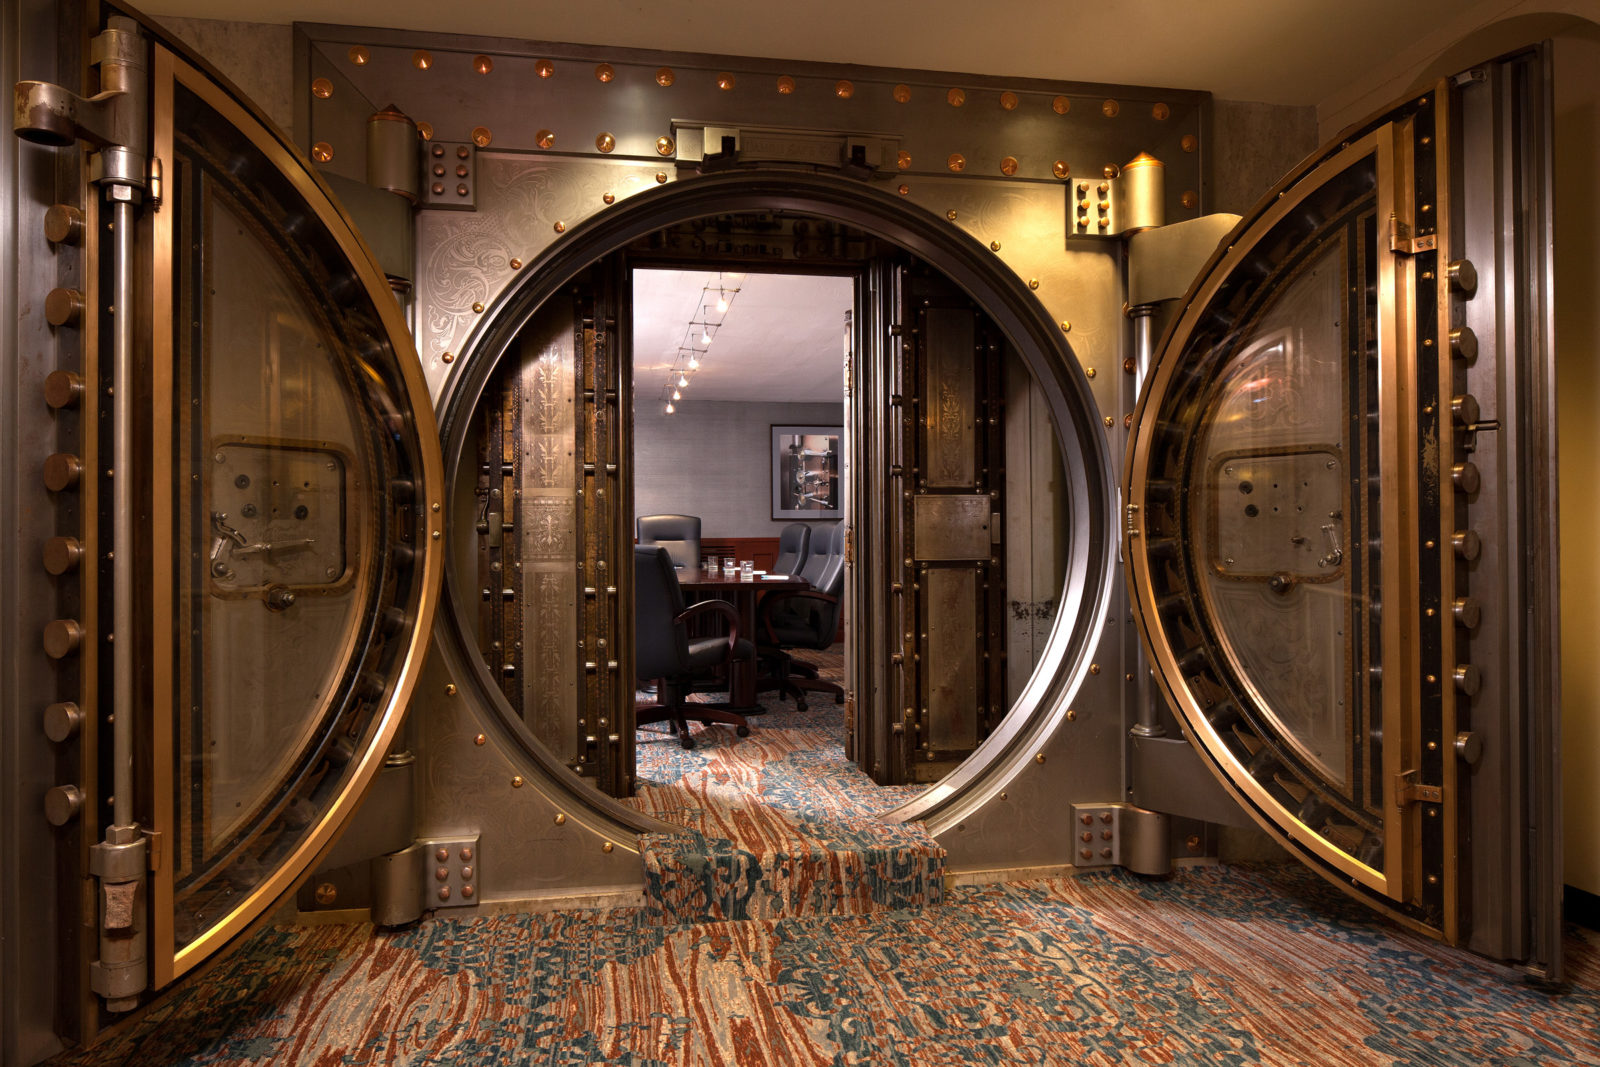 Meeting space through a bank vault design door at Springhill Suites Baltimore Inner Harbor